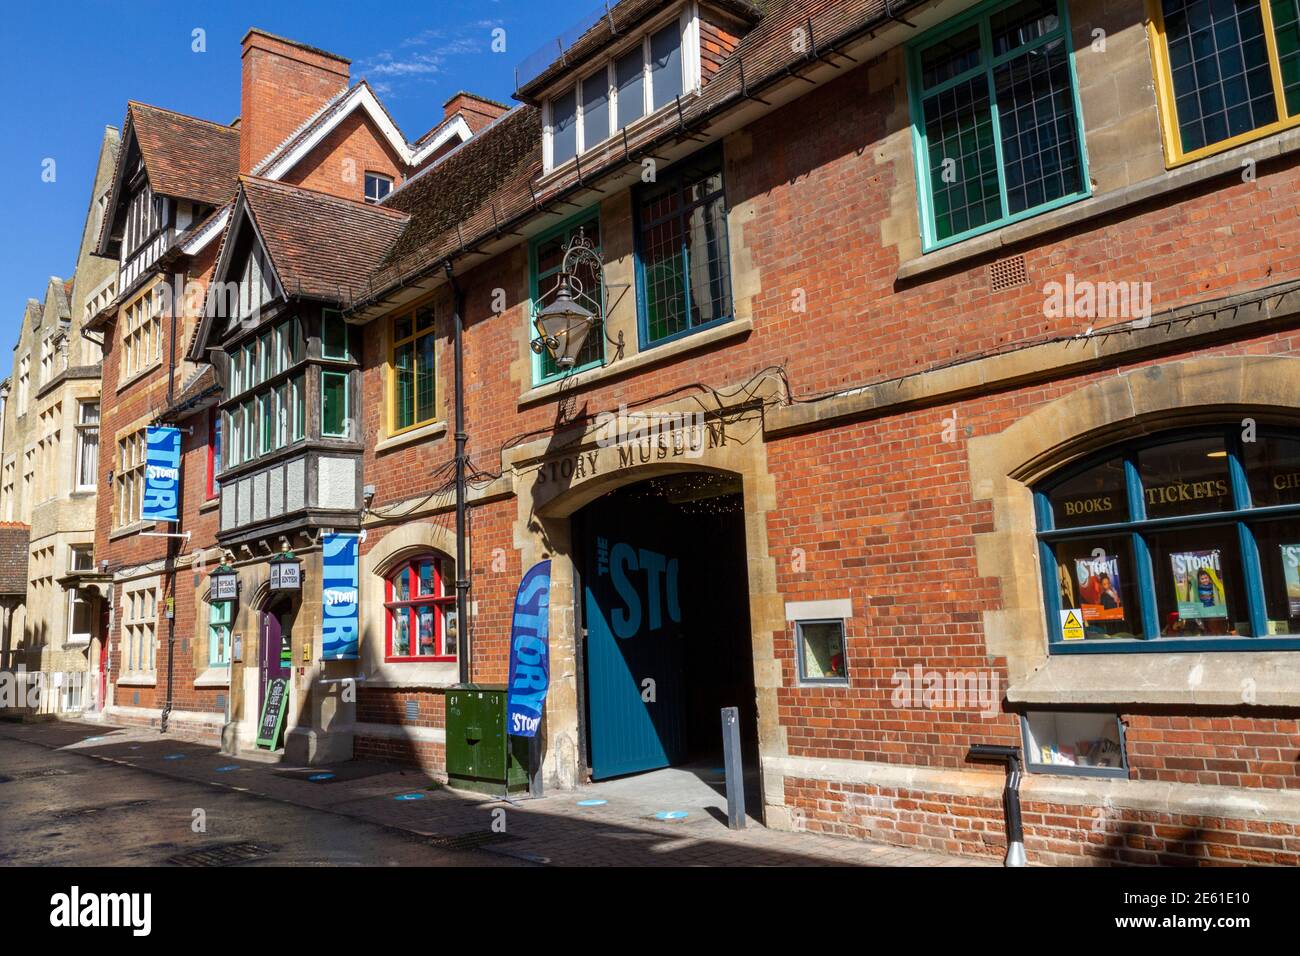 The Story Museum (it celebrates story in all forms), Oxford, Oxfordshire, UK. Stock Photo